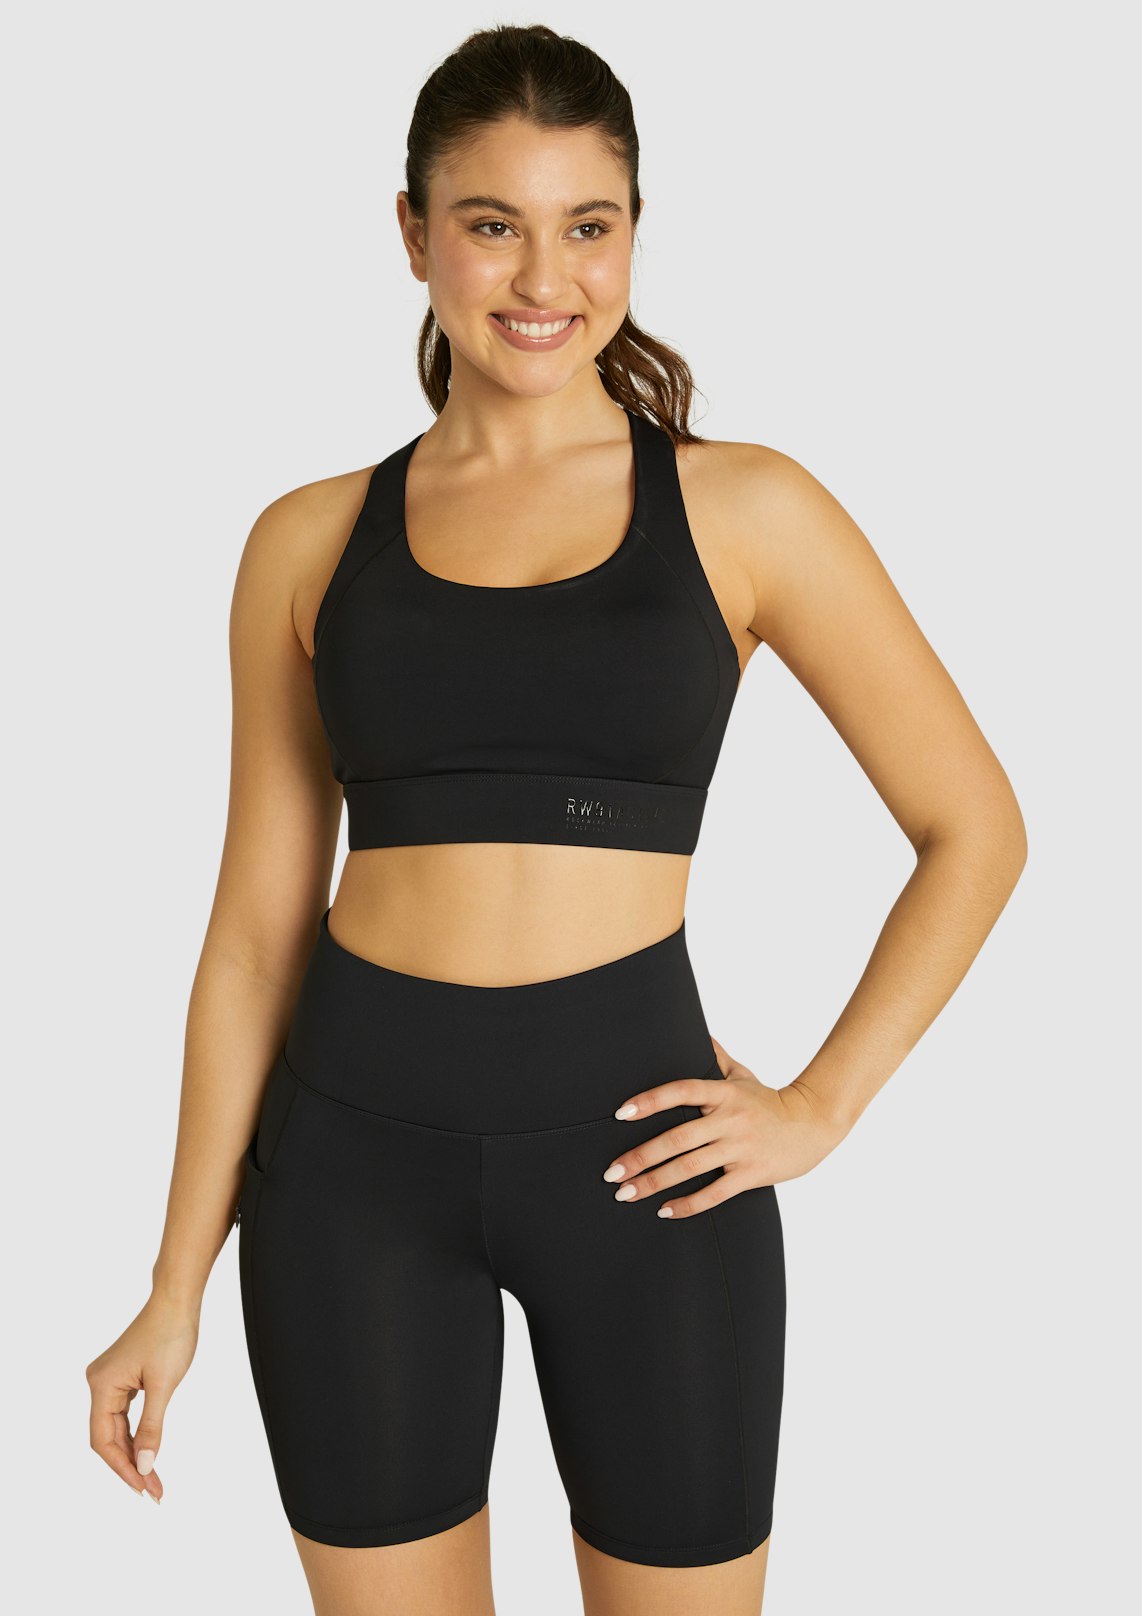 Rockwear - Our best selling Moulded Sports Bra is back new colours